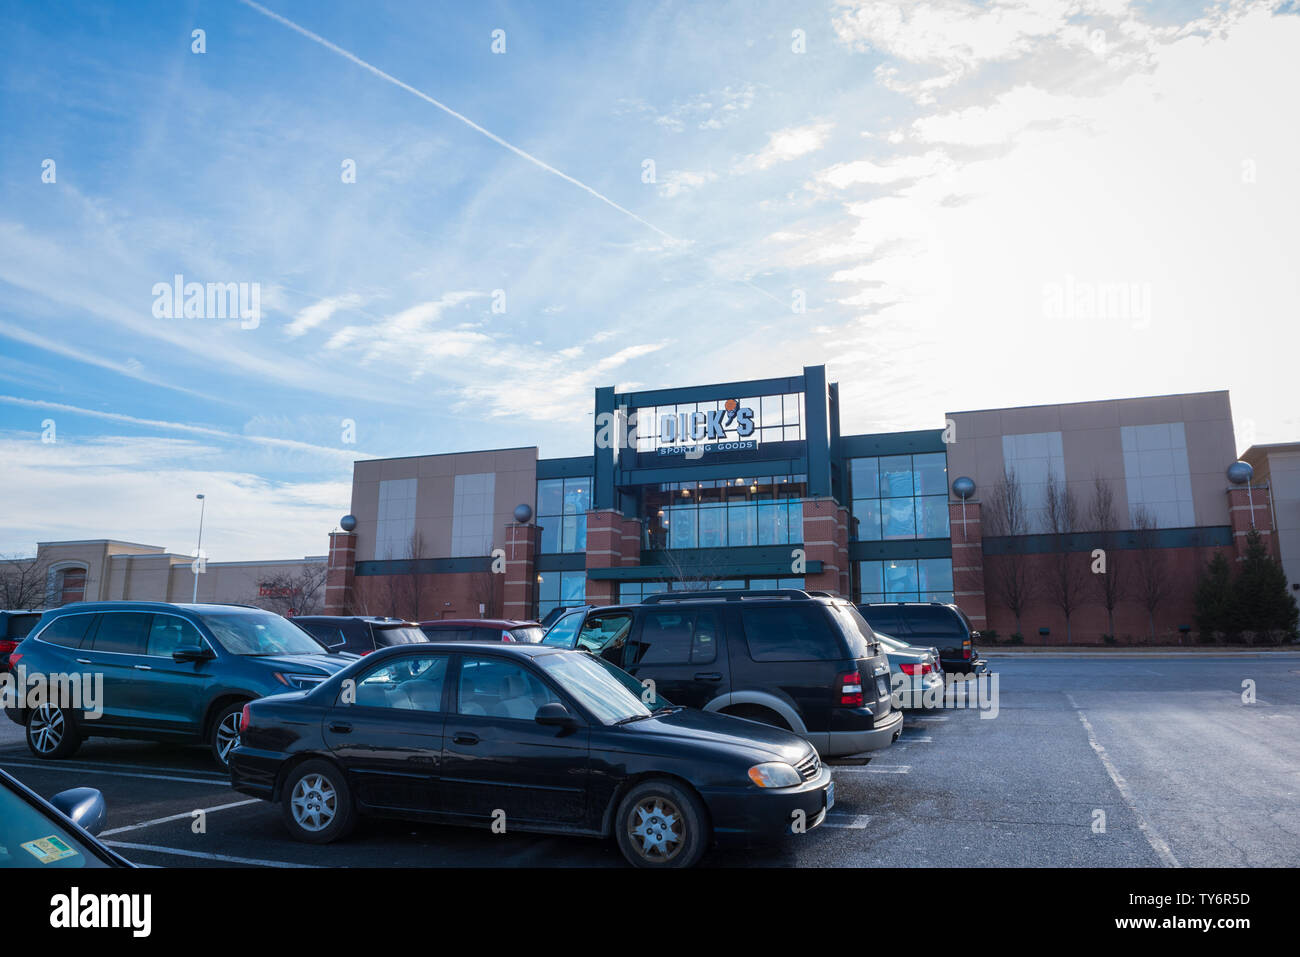 STERLING, VIRGINIA / USA - January 31, 2018: A section of Dulles Town Center showing Dicks Sporting Goods Store and outside parking lot Stock Photo